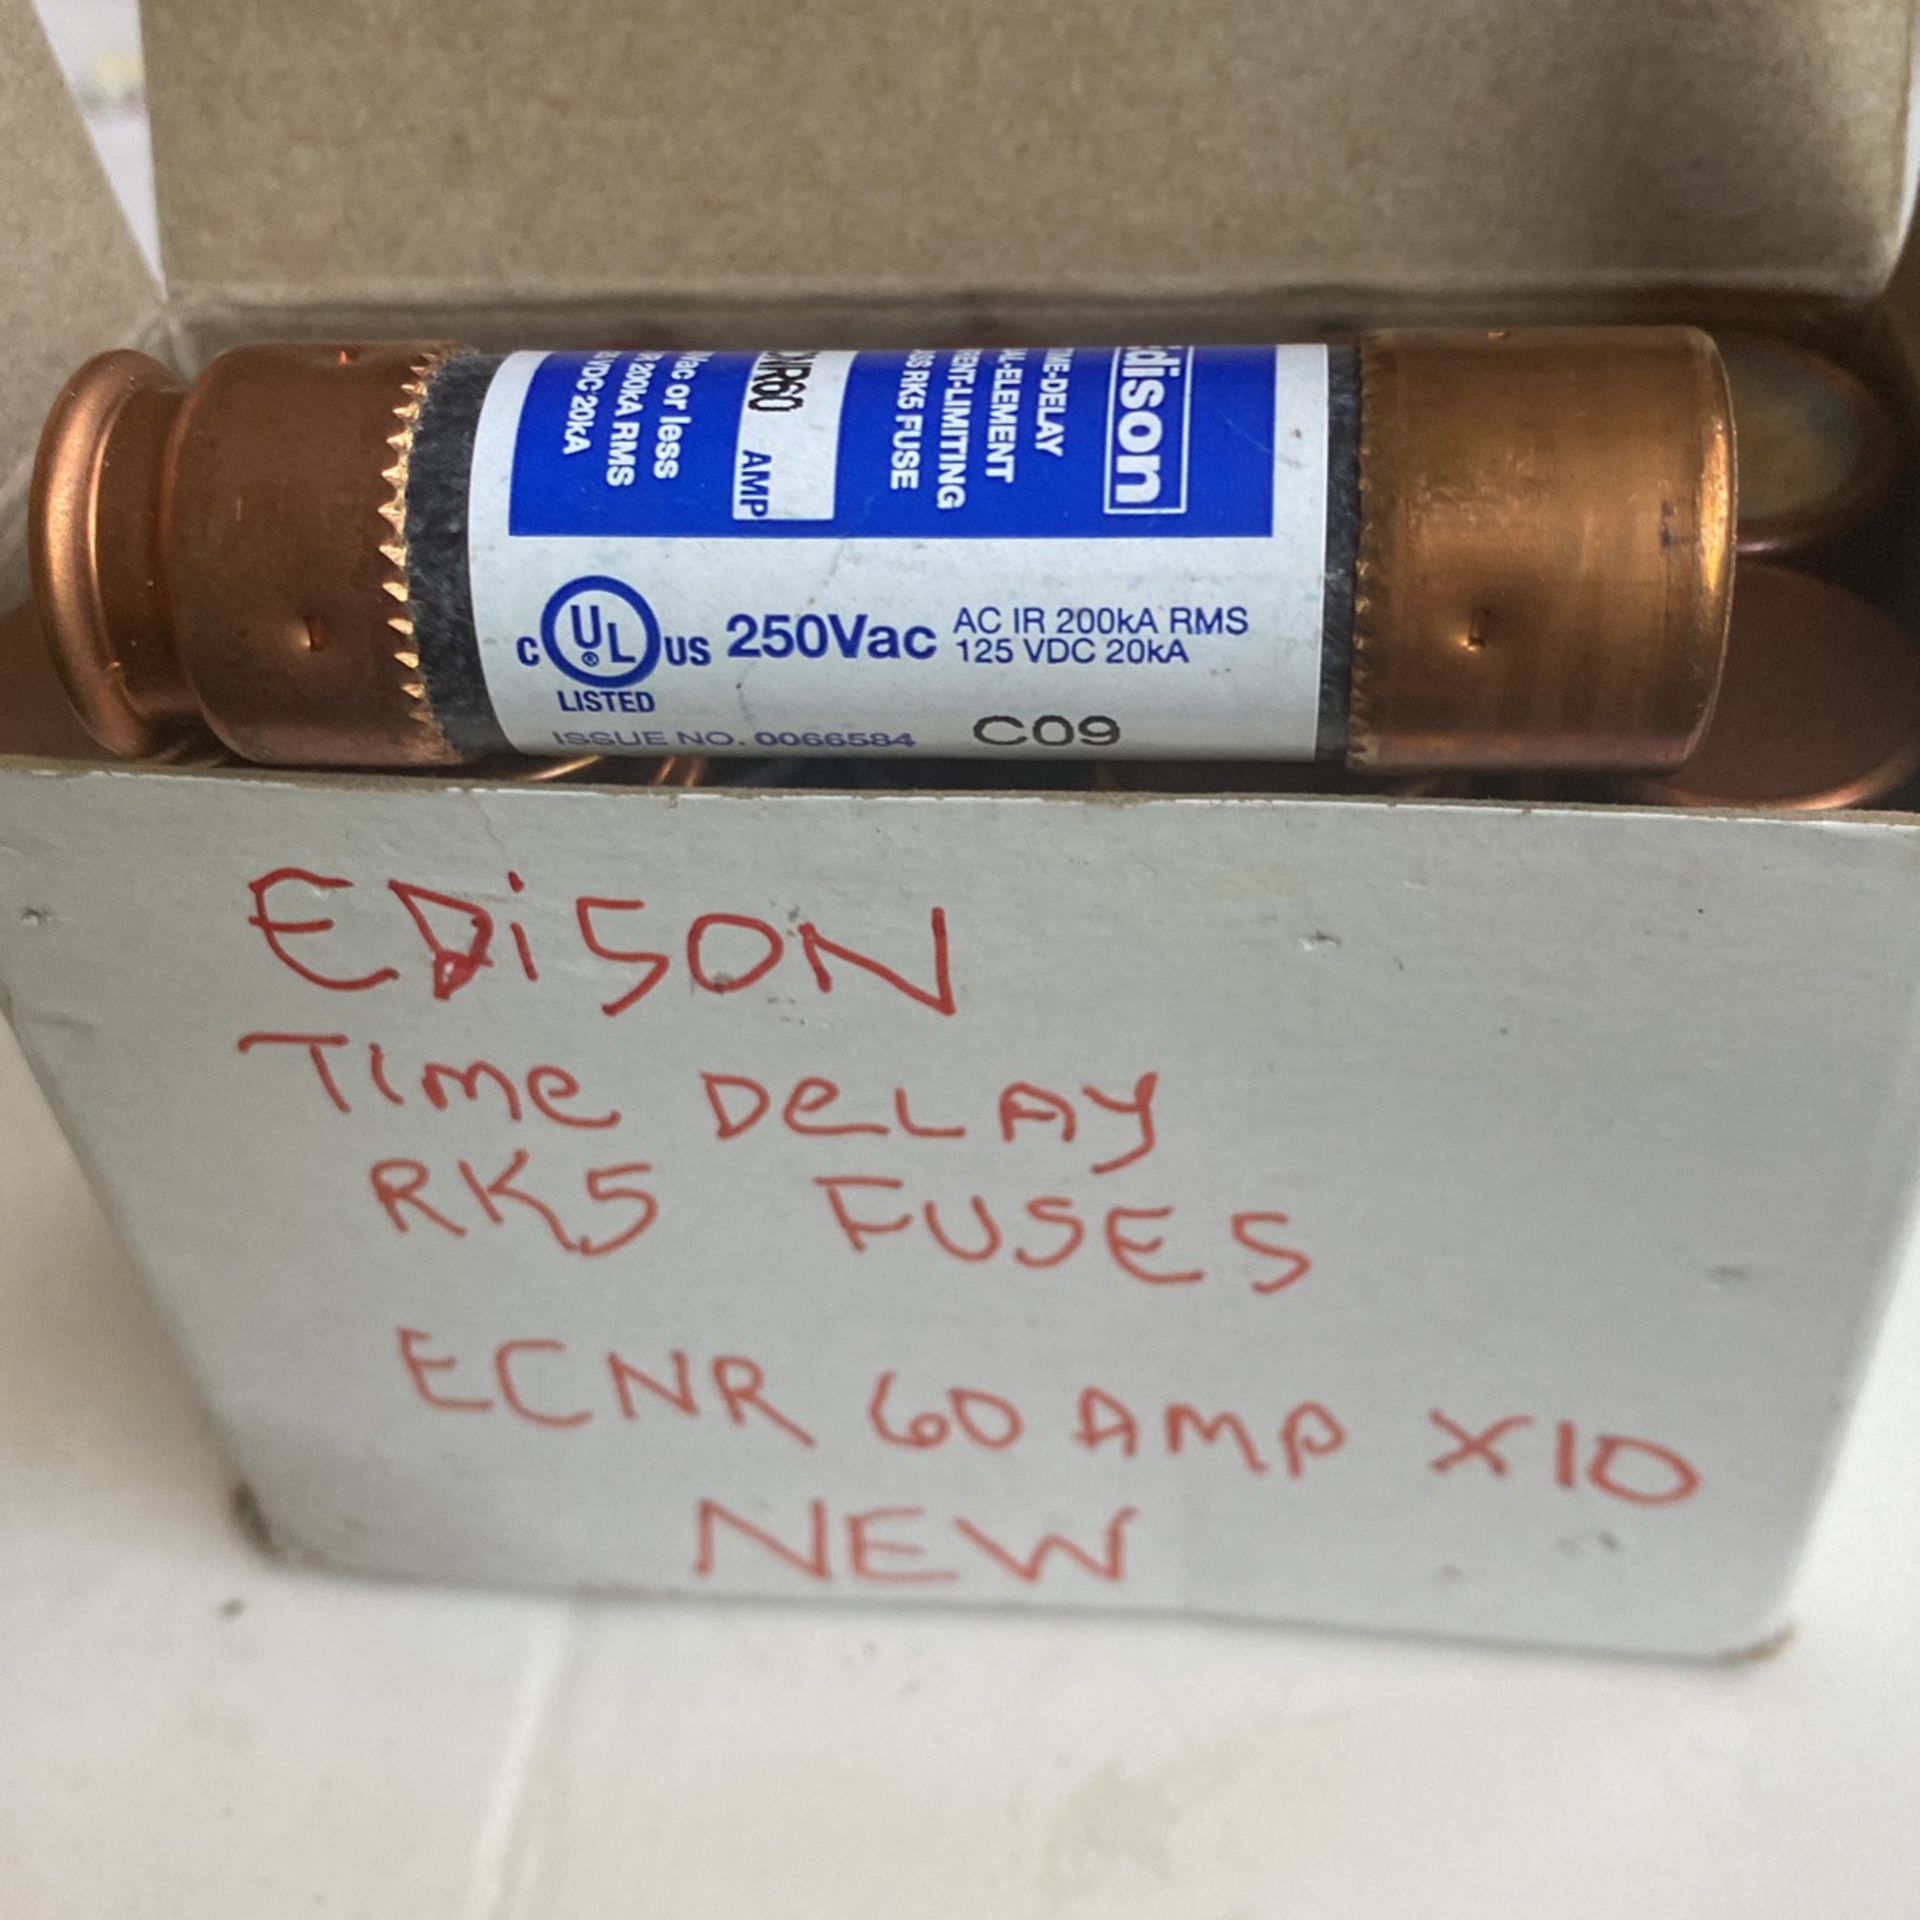 10 New 60 AMP FUSES for Sale in Carmichael, CA OfferUp